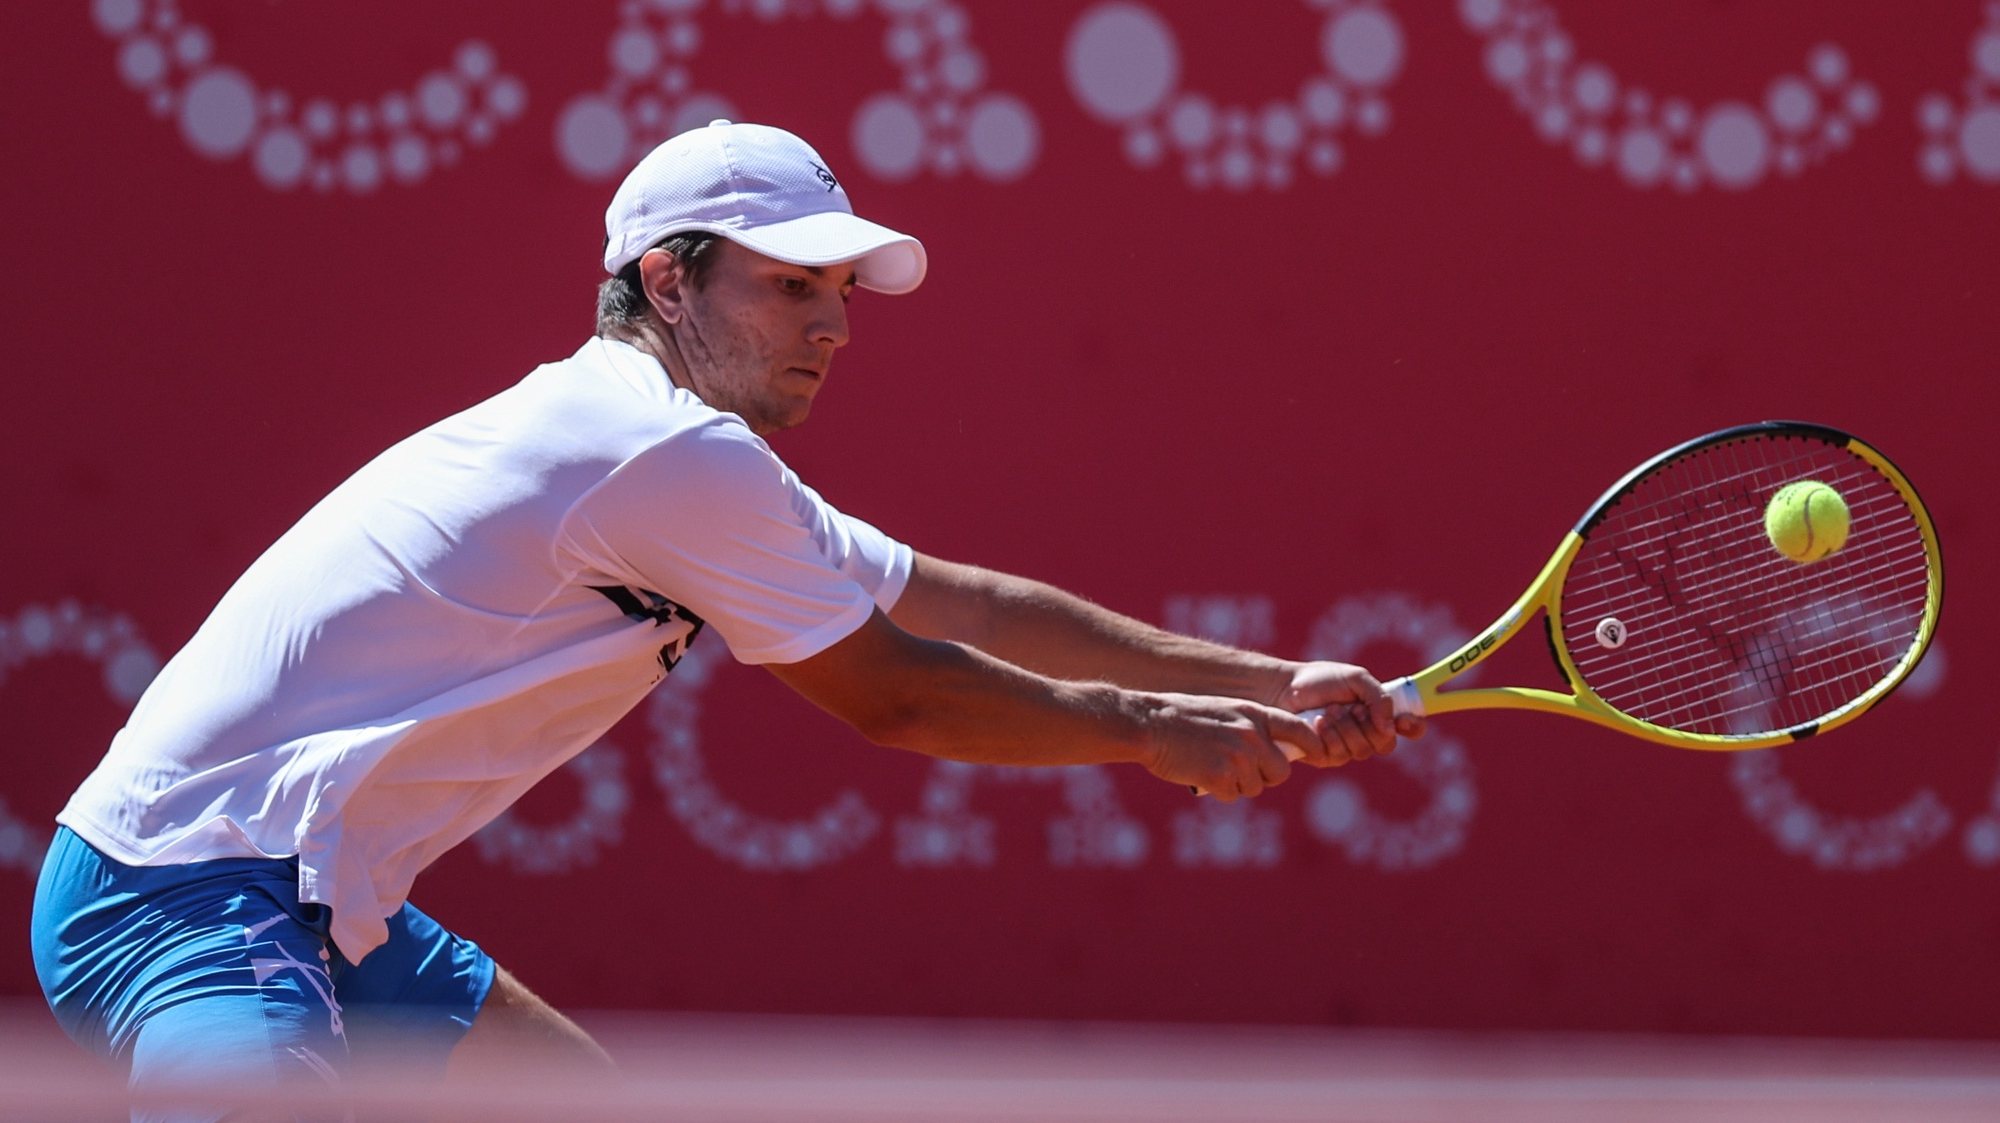 Miomir Kecmanovic from Serbia in action against Jurij Rodionov from Austria in the round of 16 match at the Estoril Open Tennis tournament in Estoril, on the outskirts of Lisbon, Portugal, 06 of April 2023. MIGUEL A. LOPES/LUSA